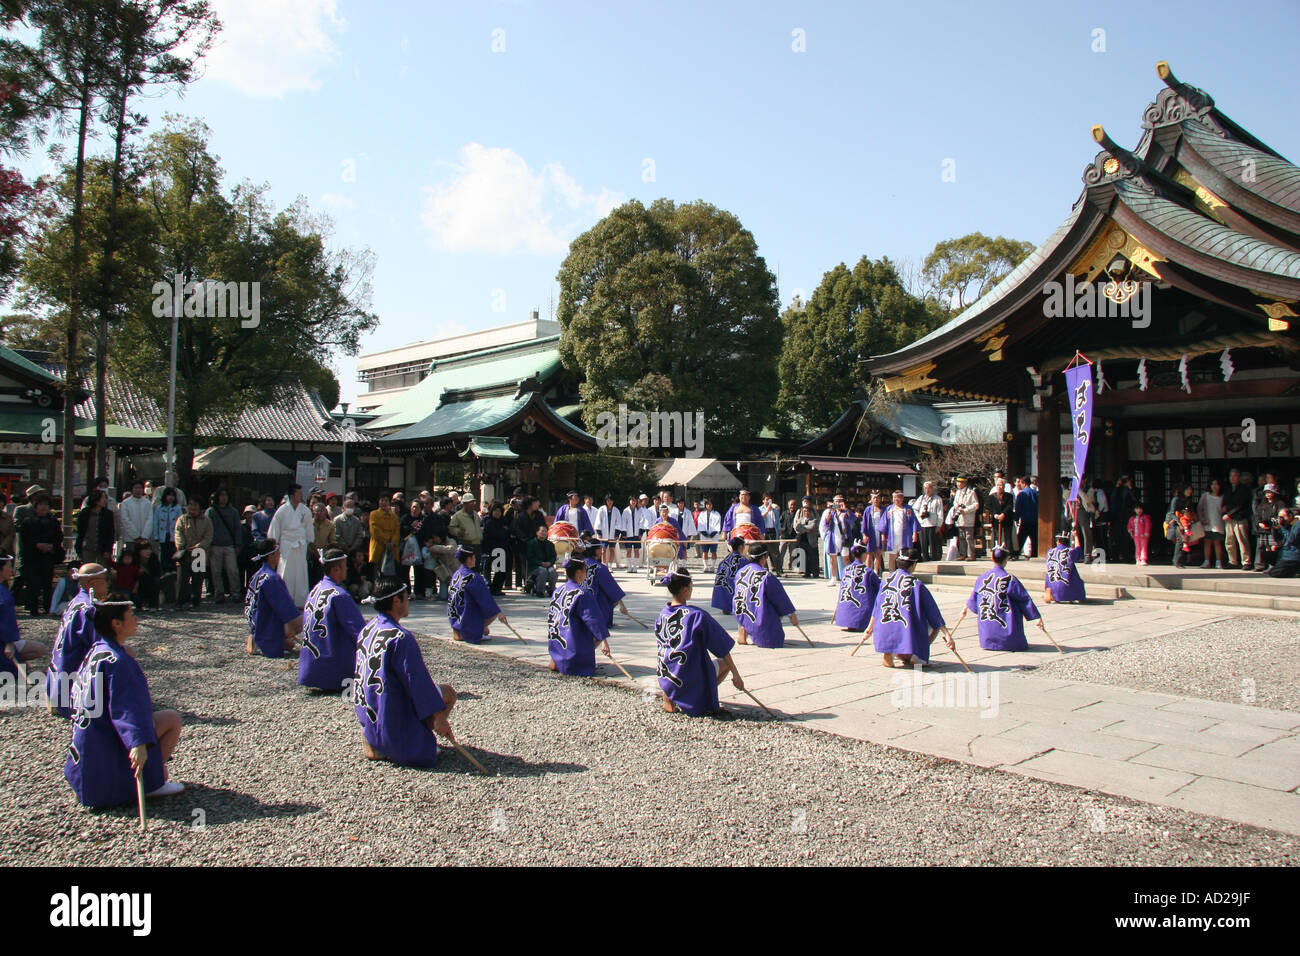 Dance at a spring 'peach blossom' festival in Japan Stock Photo